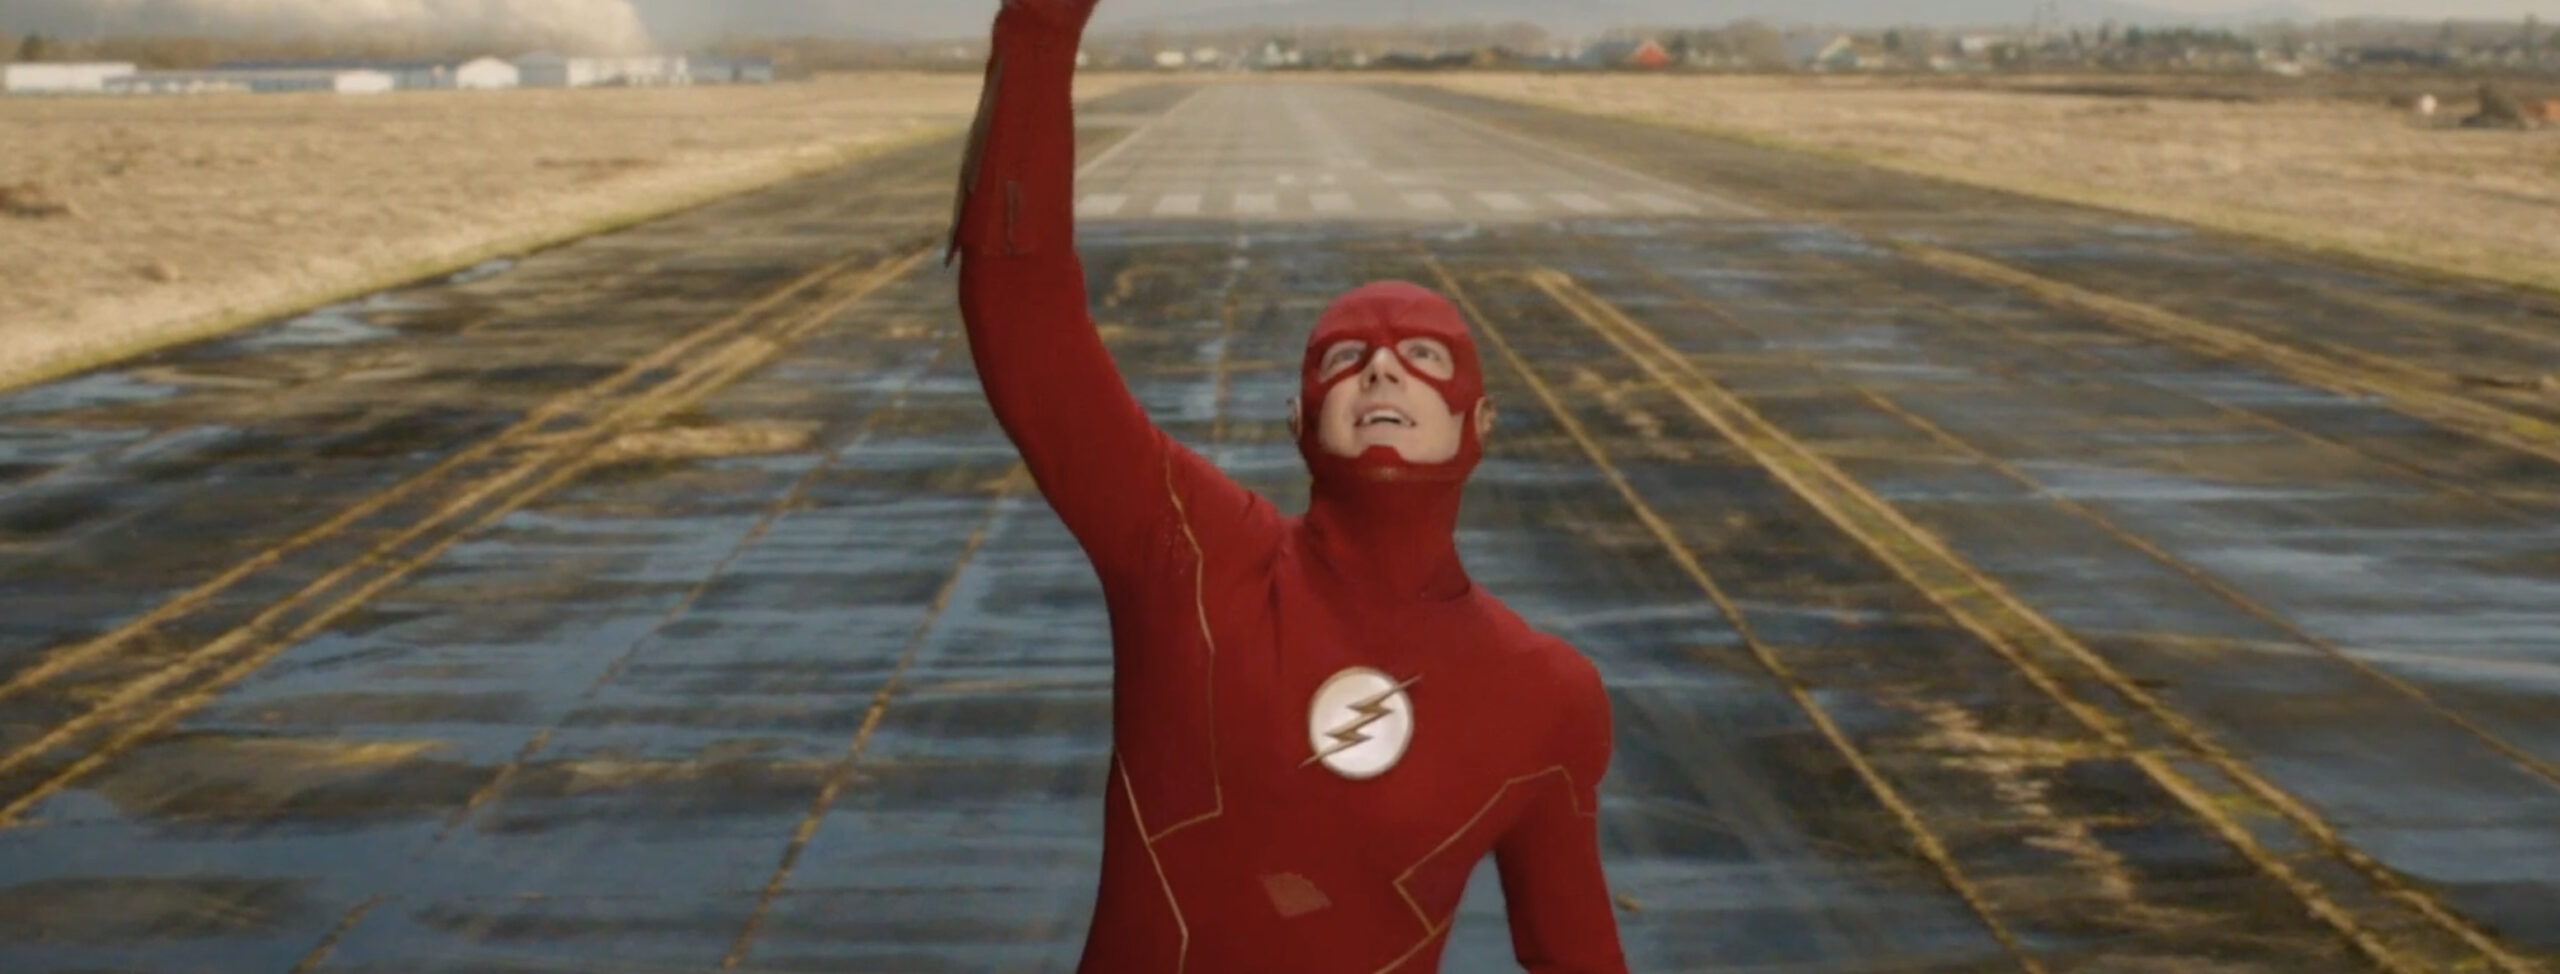 Who Are Those New Characters At The End Of The Flash Finale? | FlashTVNews